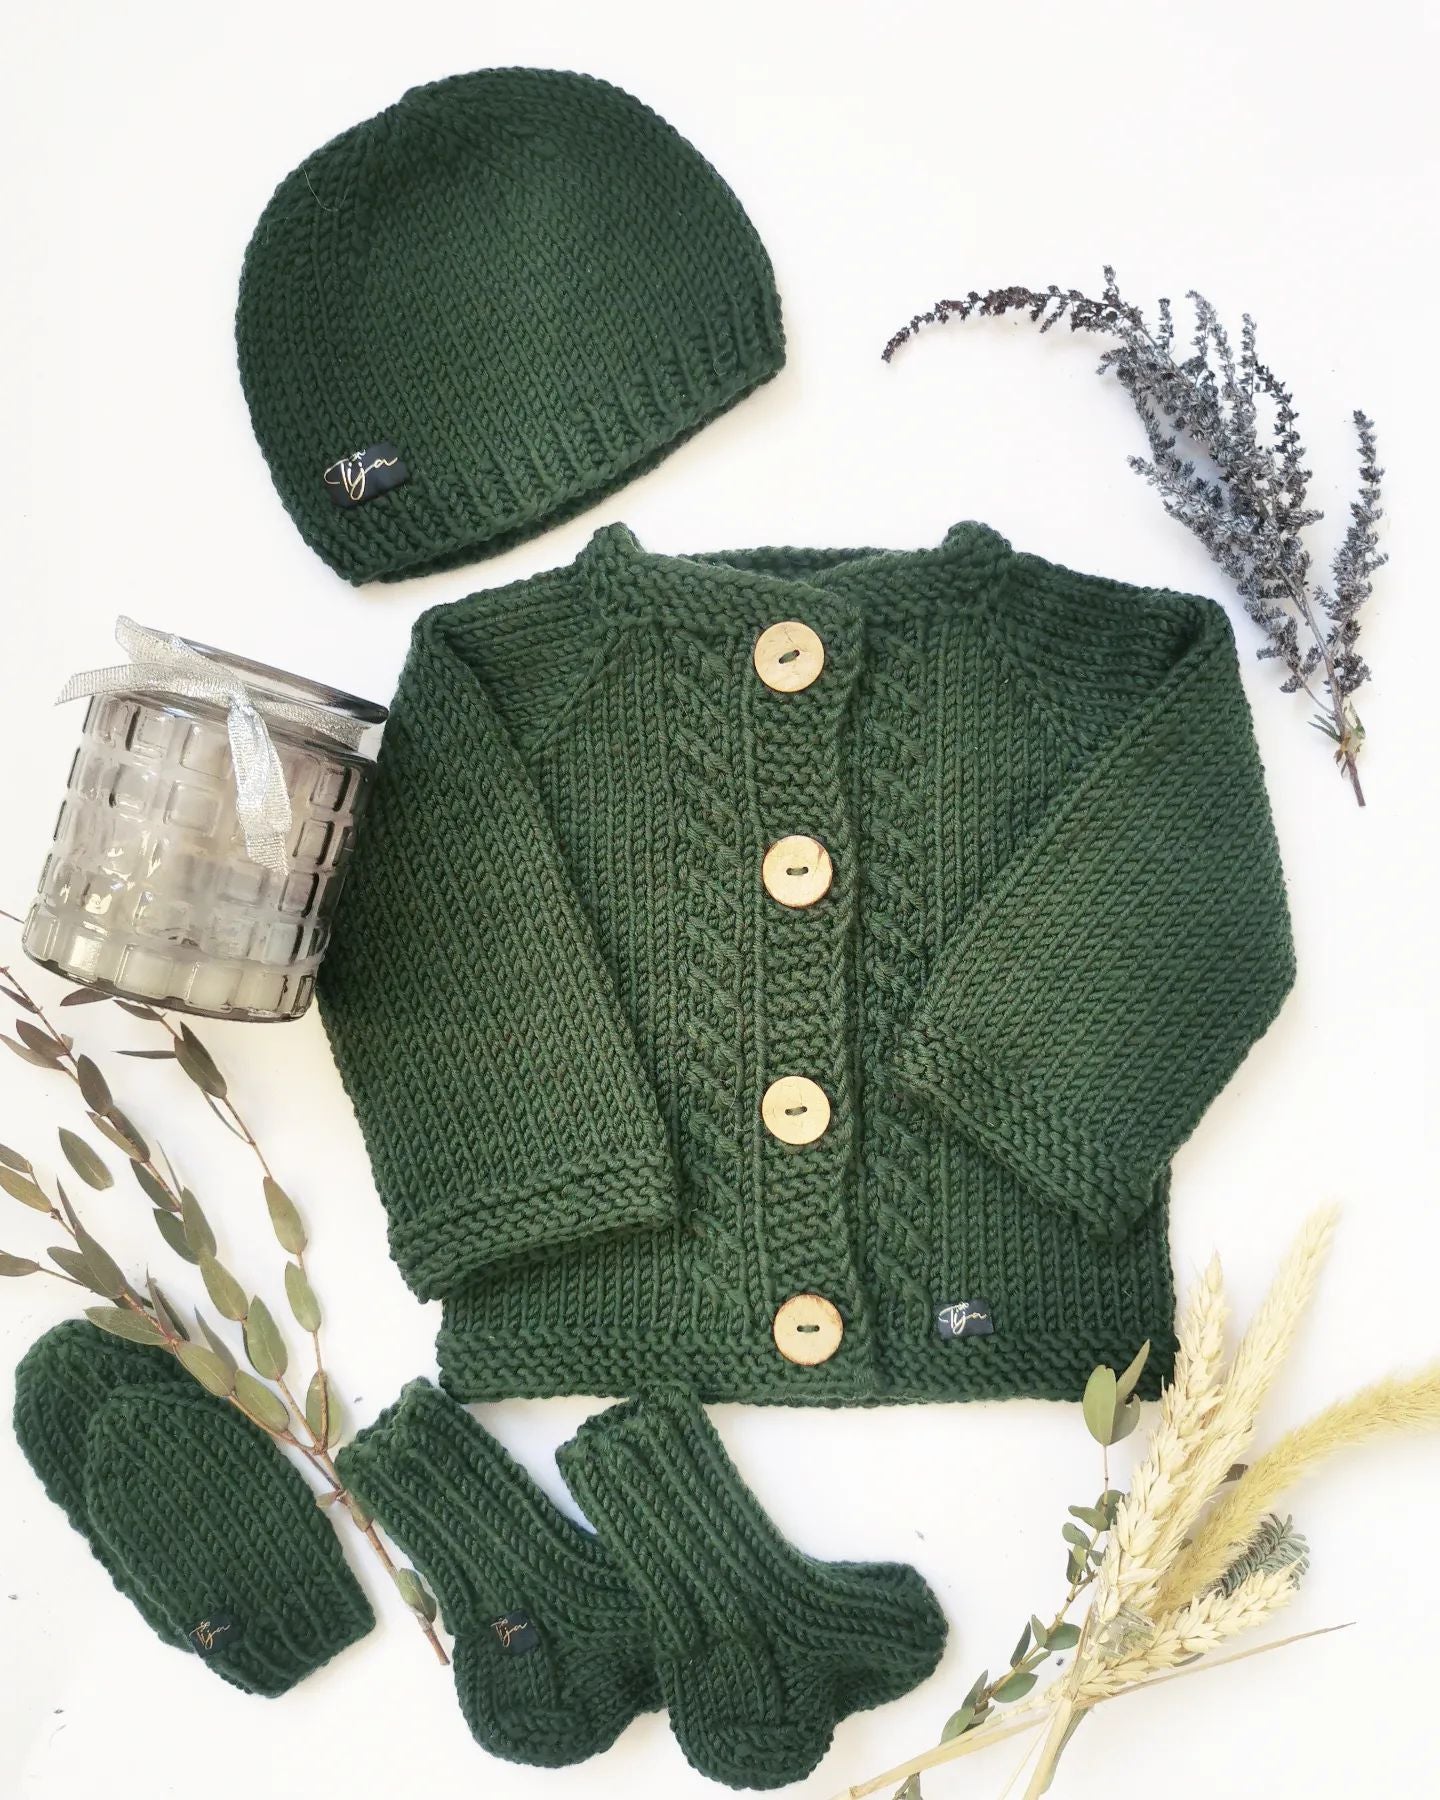 Set  - cardigan, hat, socks and/or mittens